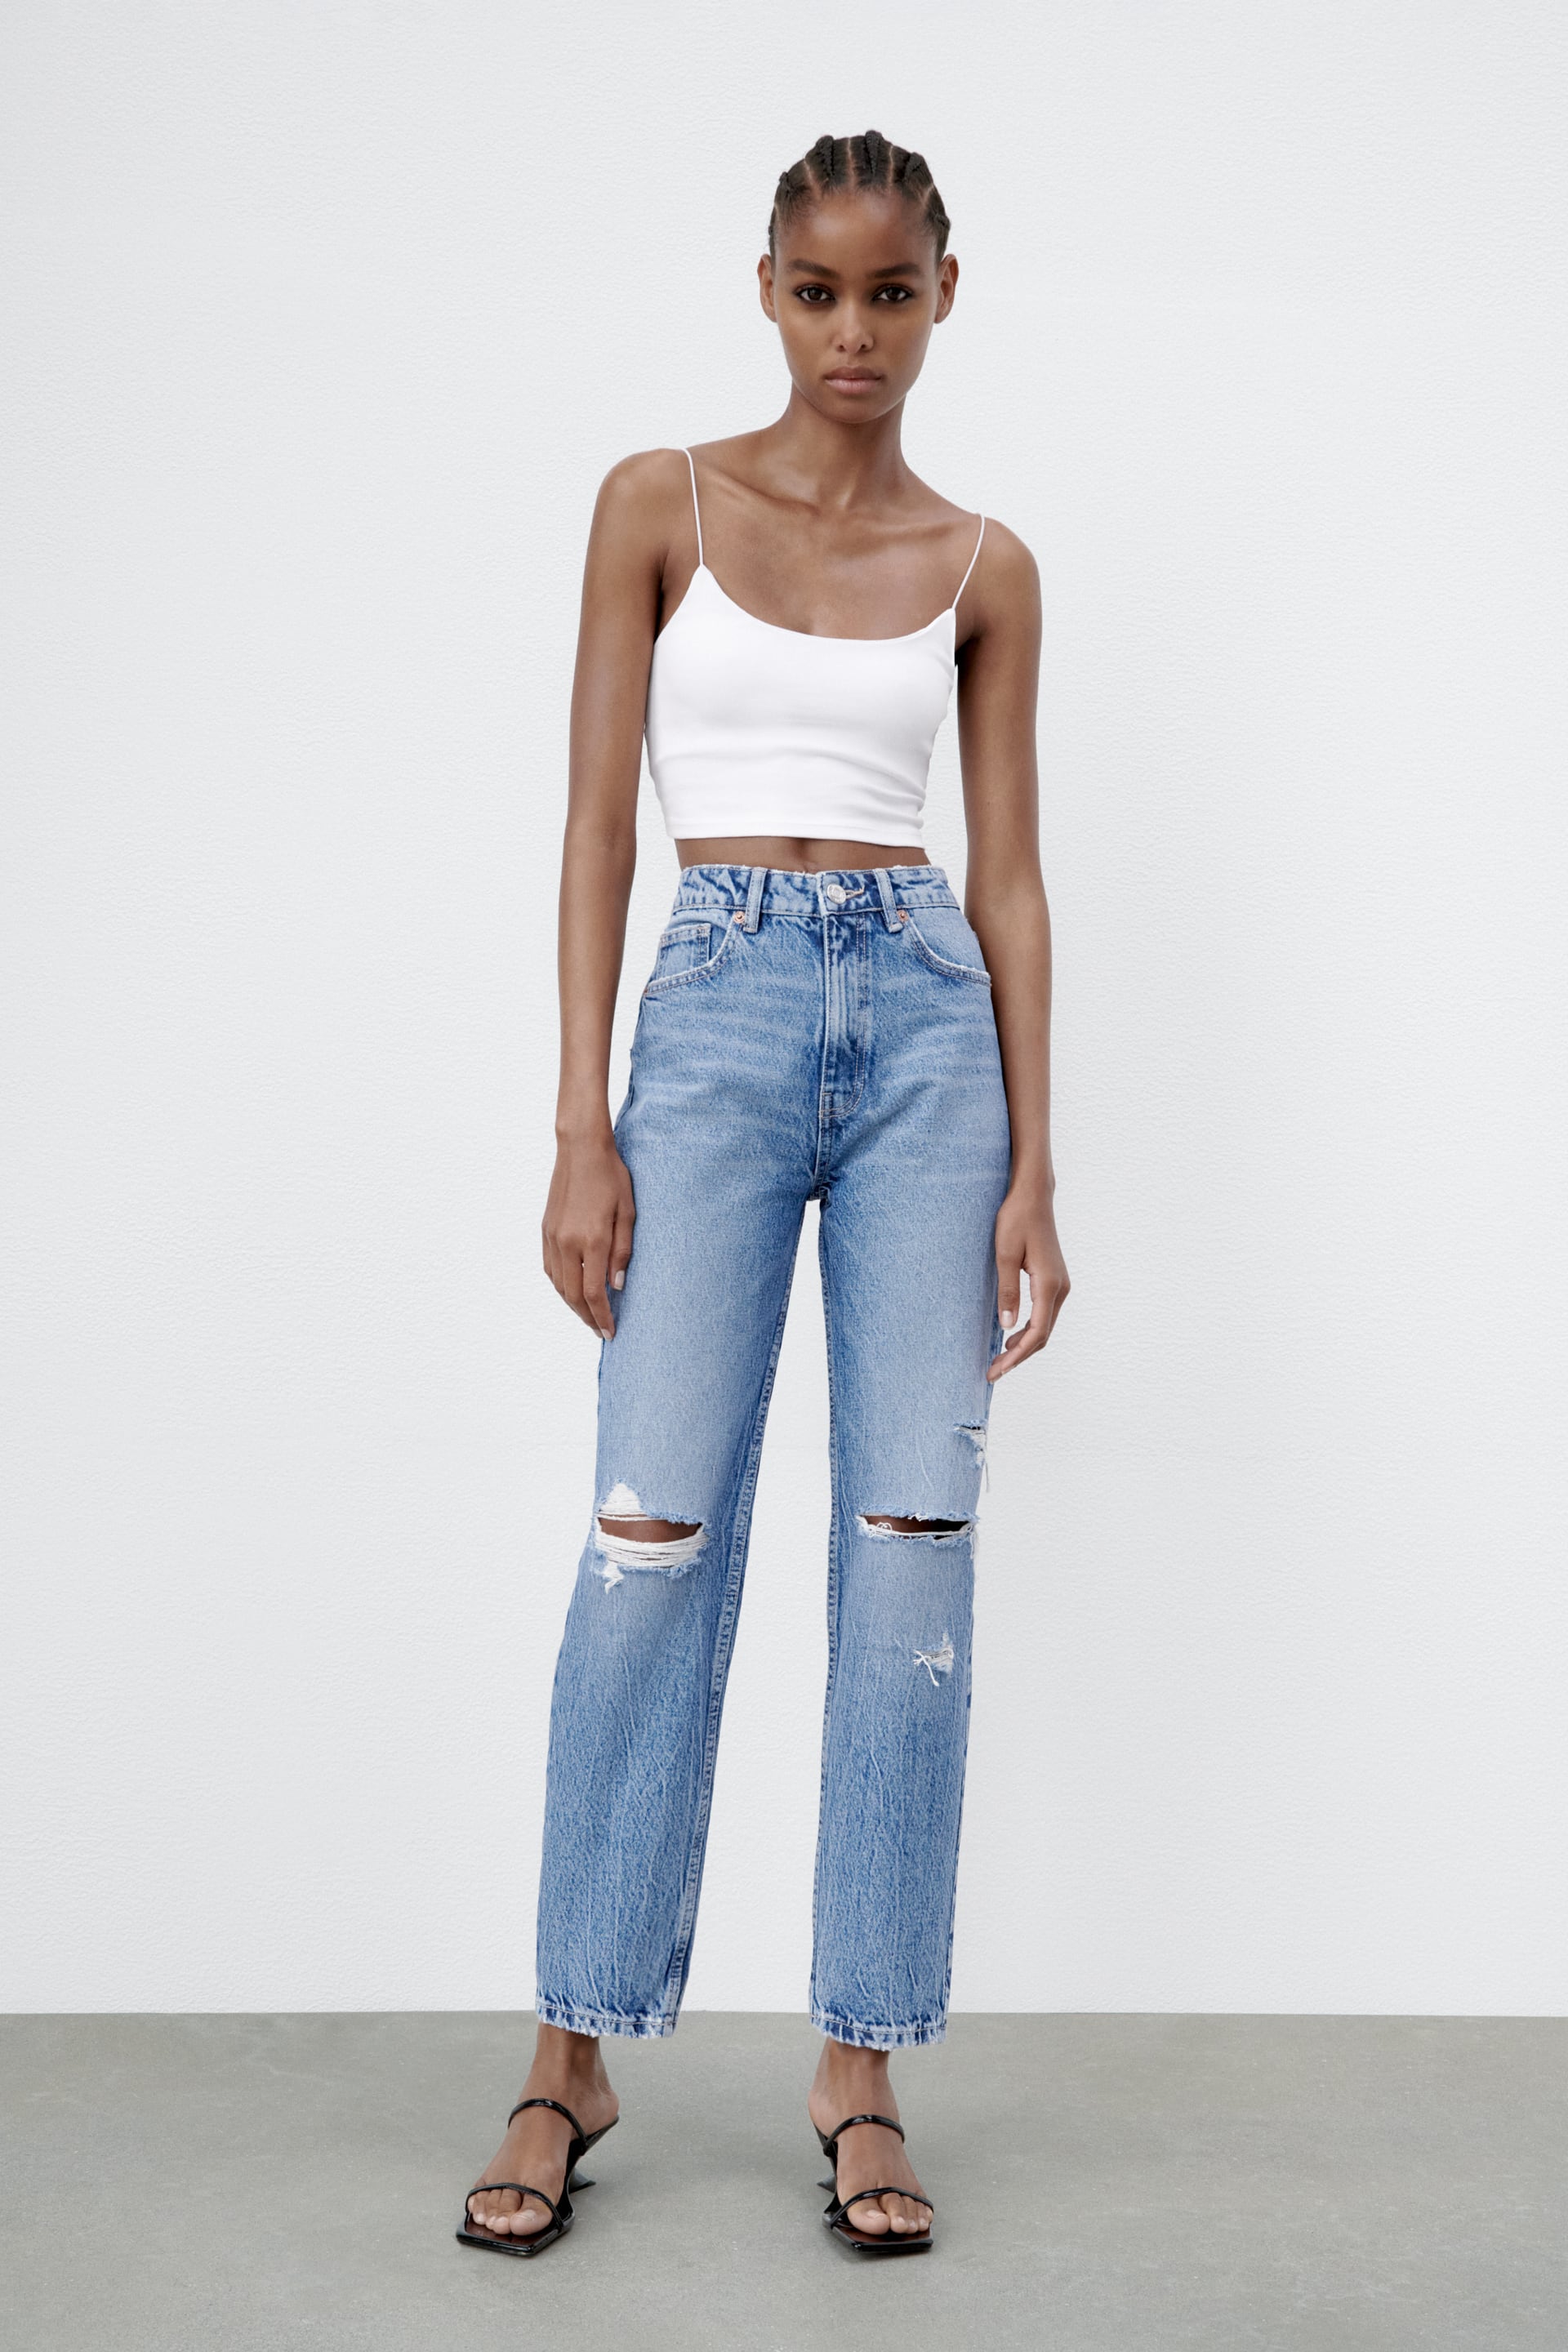 Zara RIPPED MOM FIT JEANS - 125068727-401-